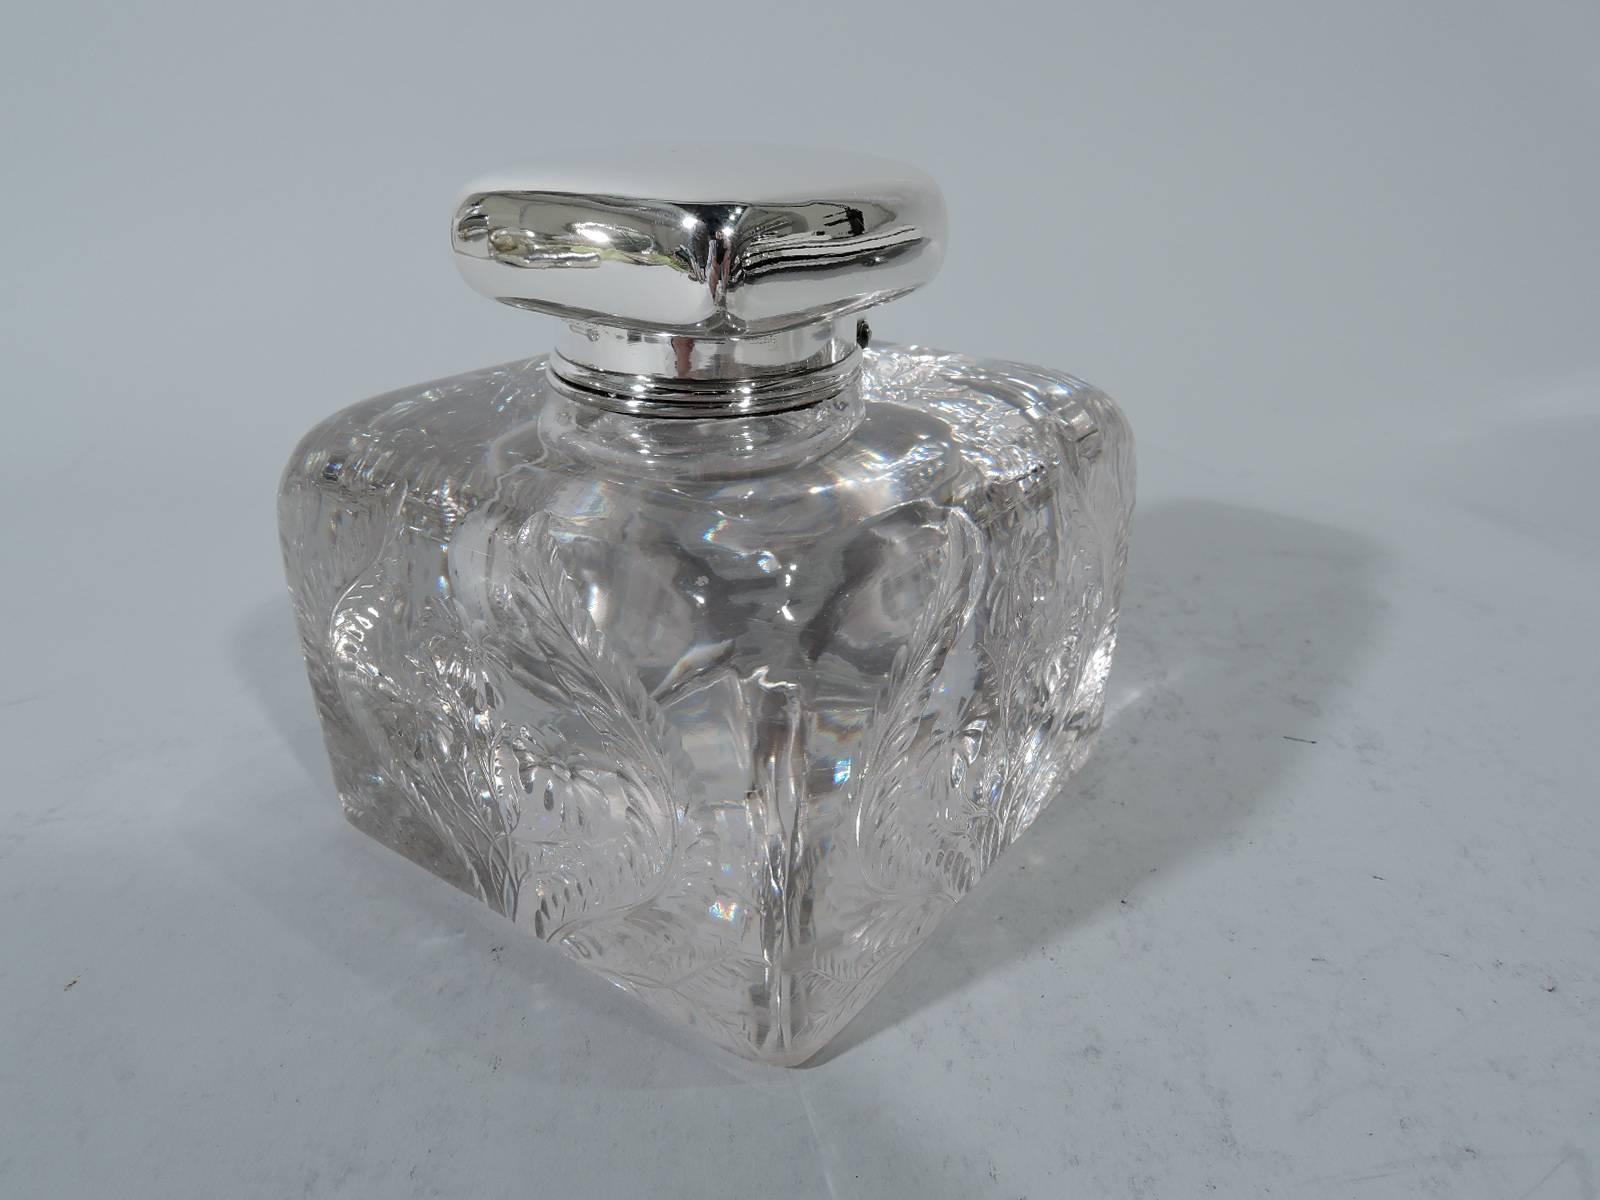 Edwardian glass and sterling silver inkwell. Made by Tiffany & Co. in New York. Rectilinear clear glass block engraved with ferns and flowers. Short neck has sterling silver collar with hinged square cover. Hallmark includes pattern no. 17360 (first